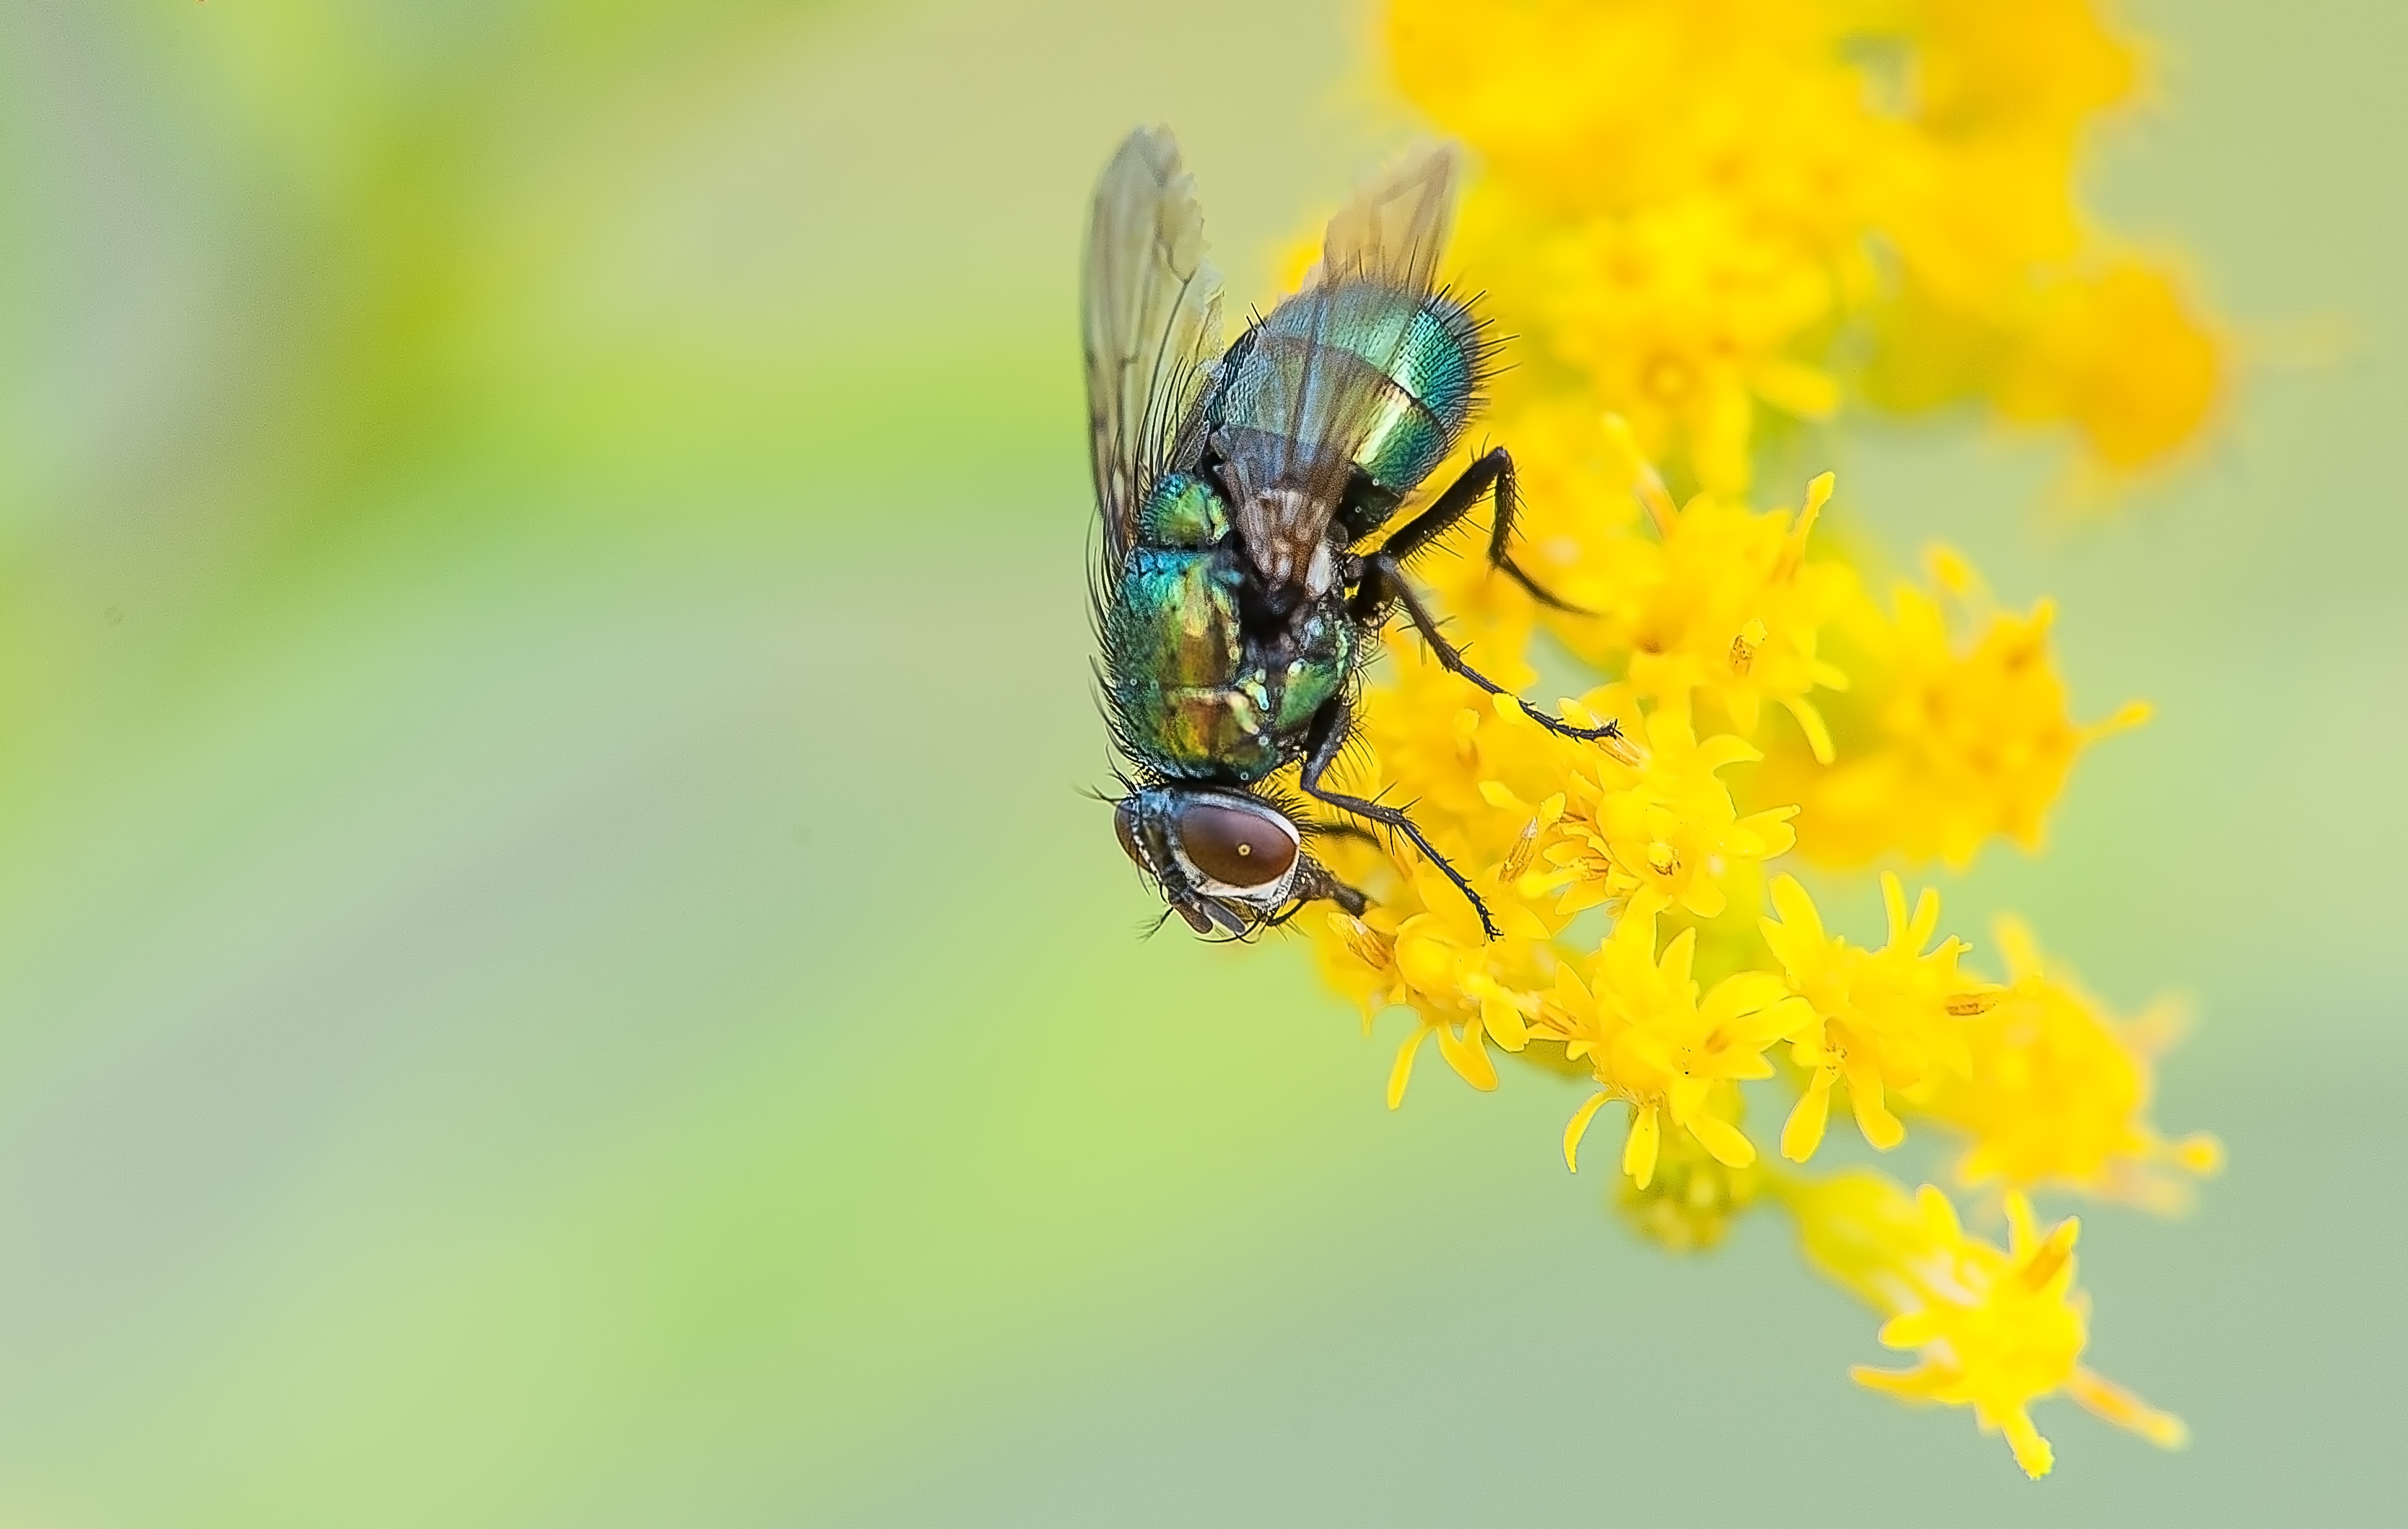 A fly on a yellow flower